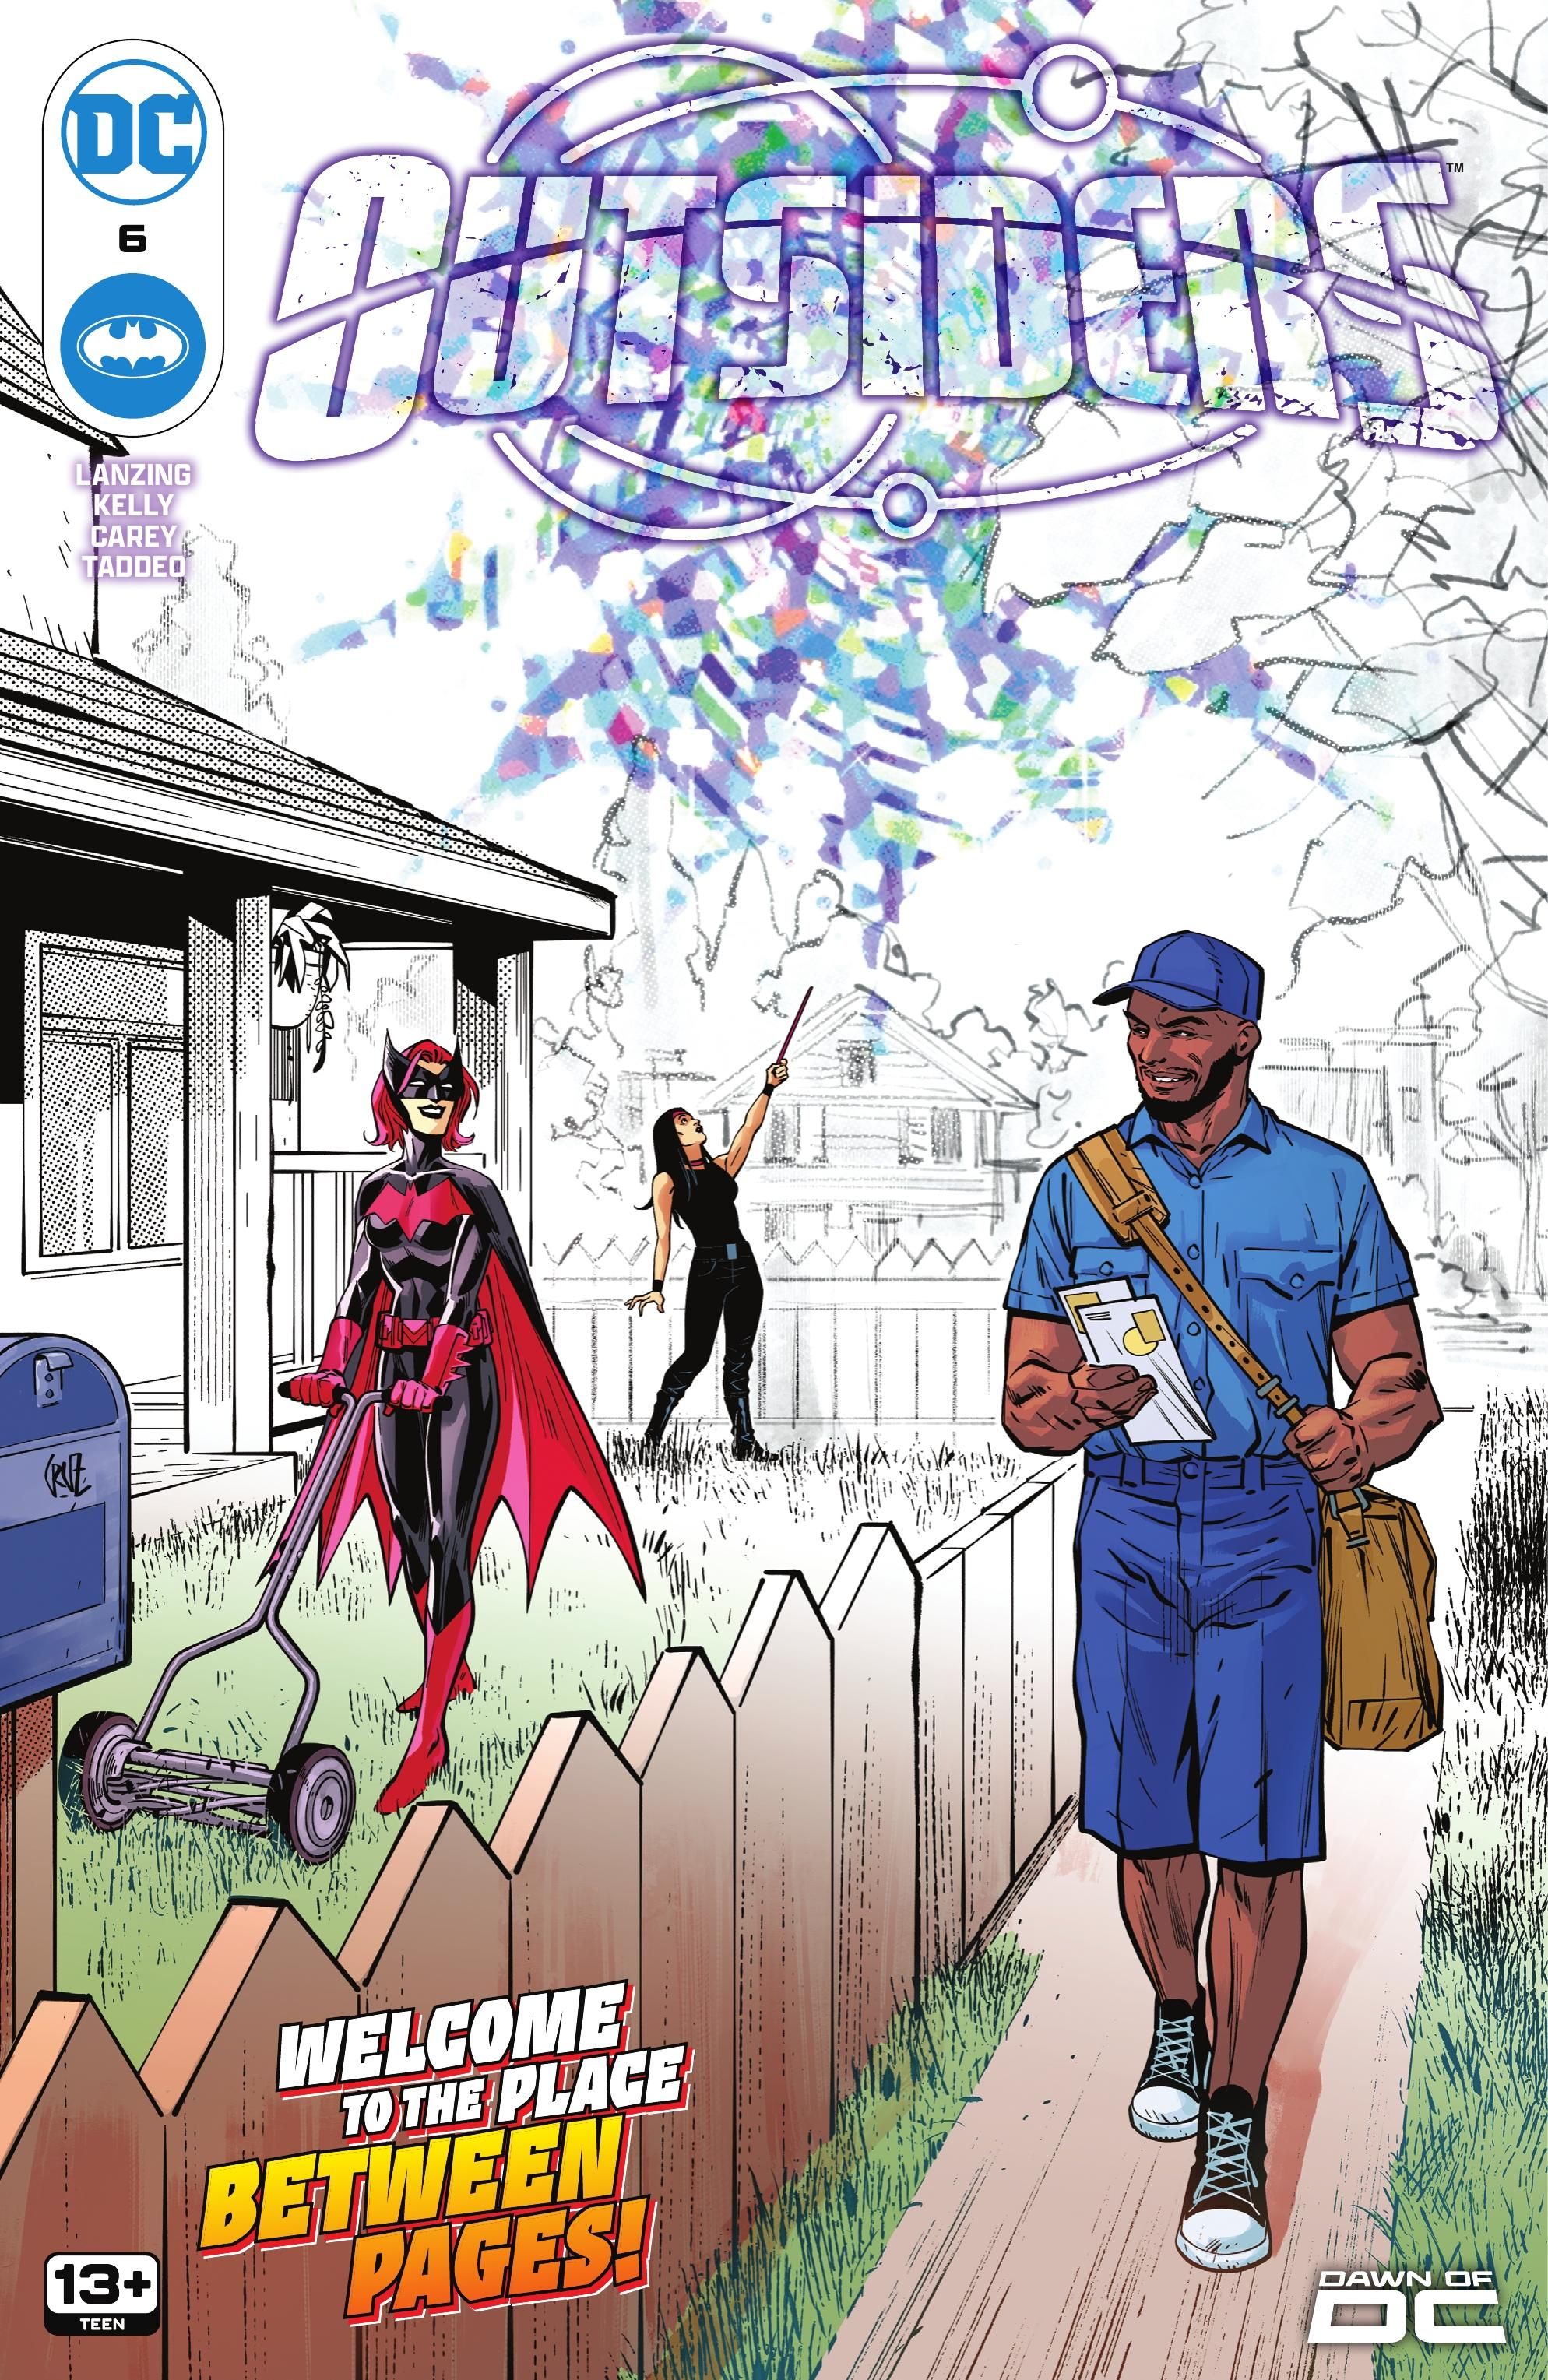 Outsiders #6 cover, Batwoman, Luke Fox, and Drummer in a suburban front yard.